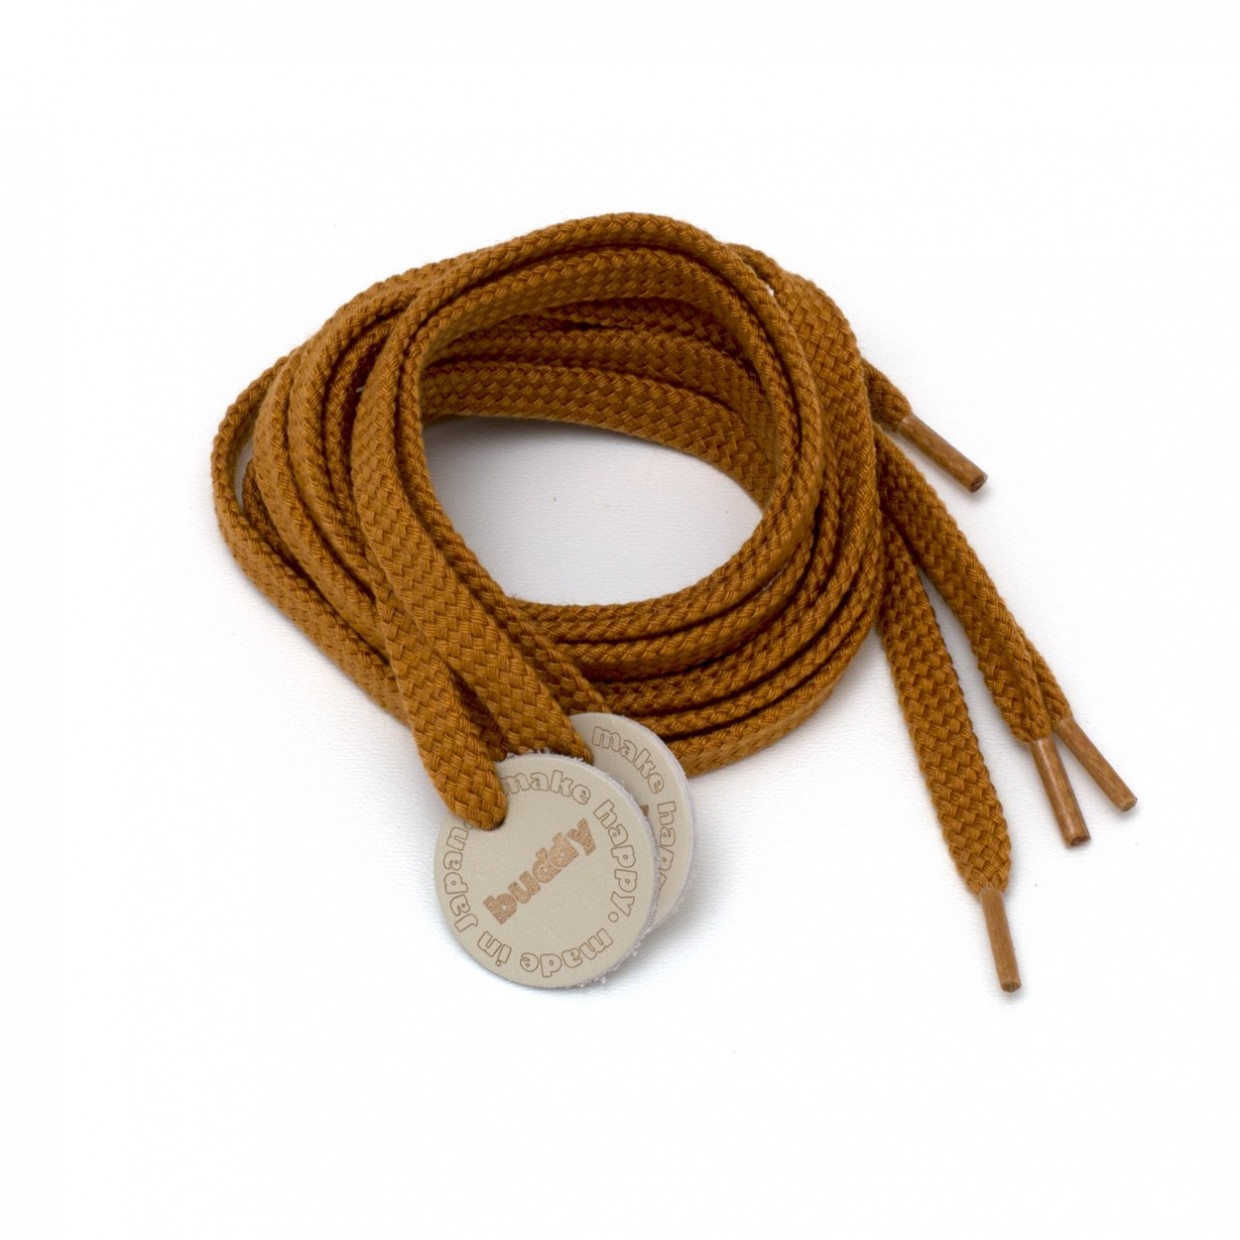 Shoelaces Camel with Leather patch 130 cm : 51"